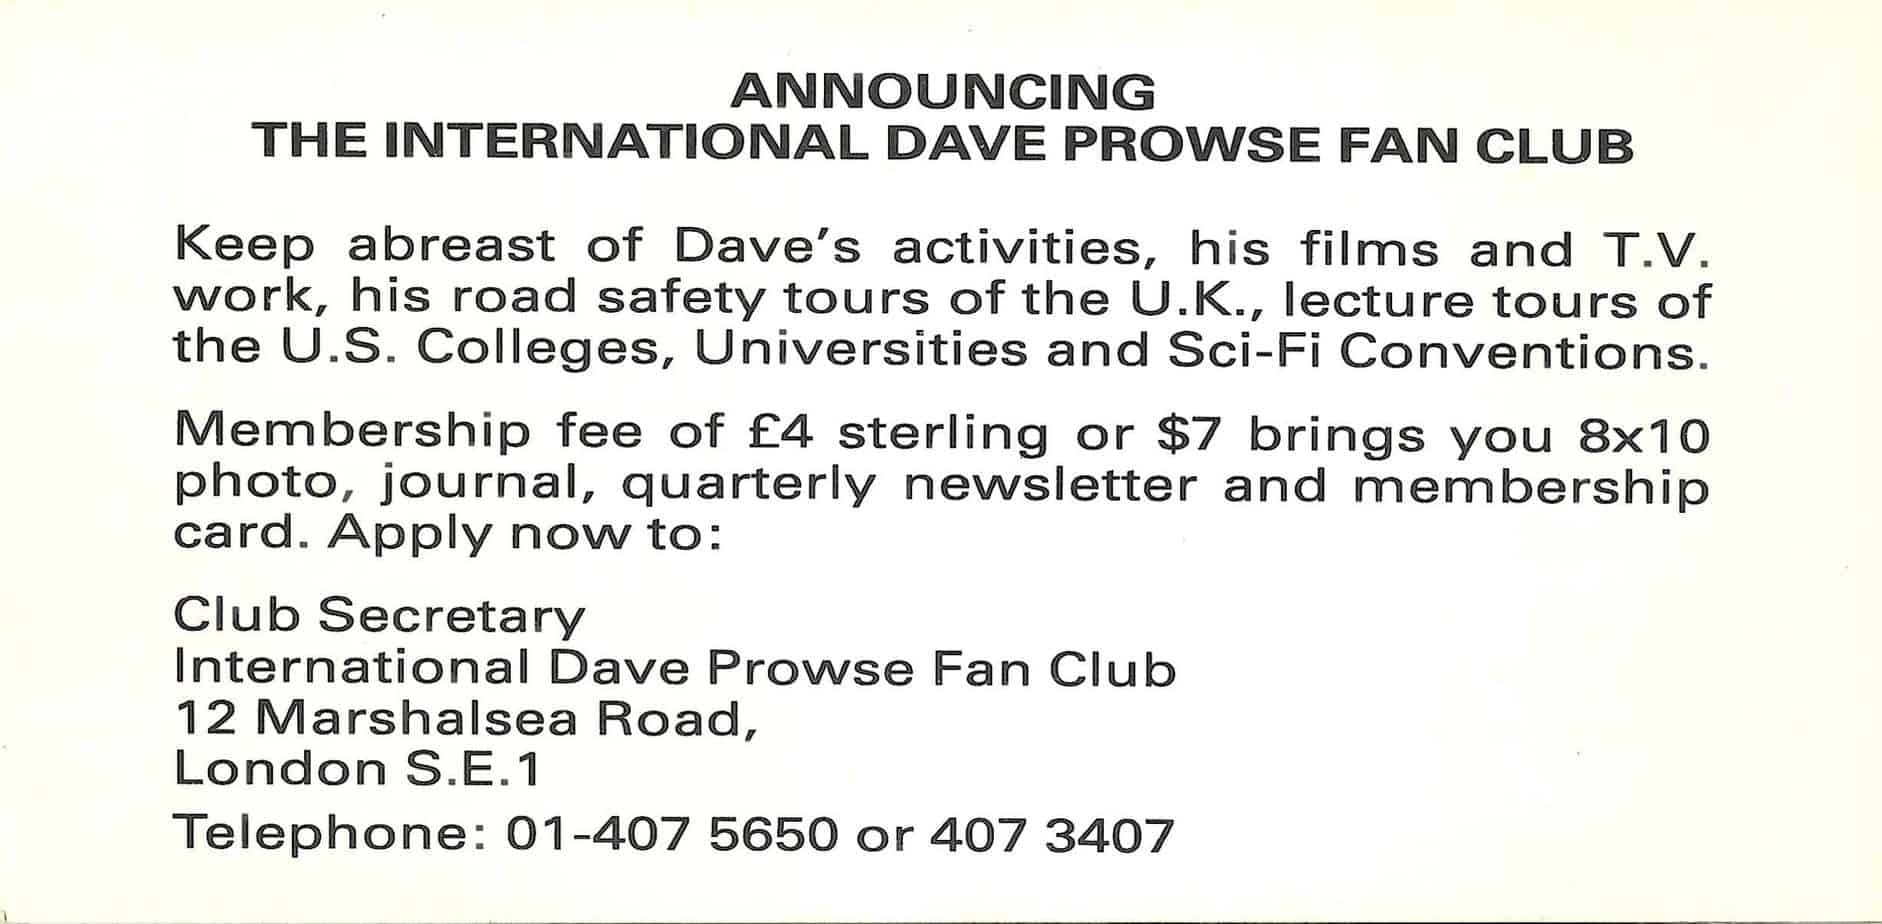 Advertisement for the David Prowse Fan Club